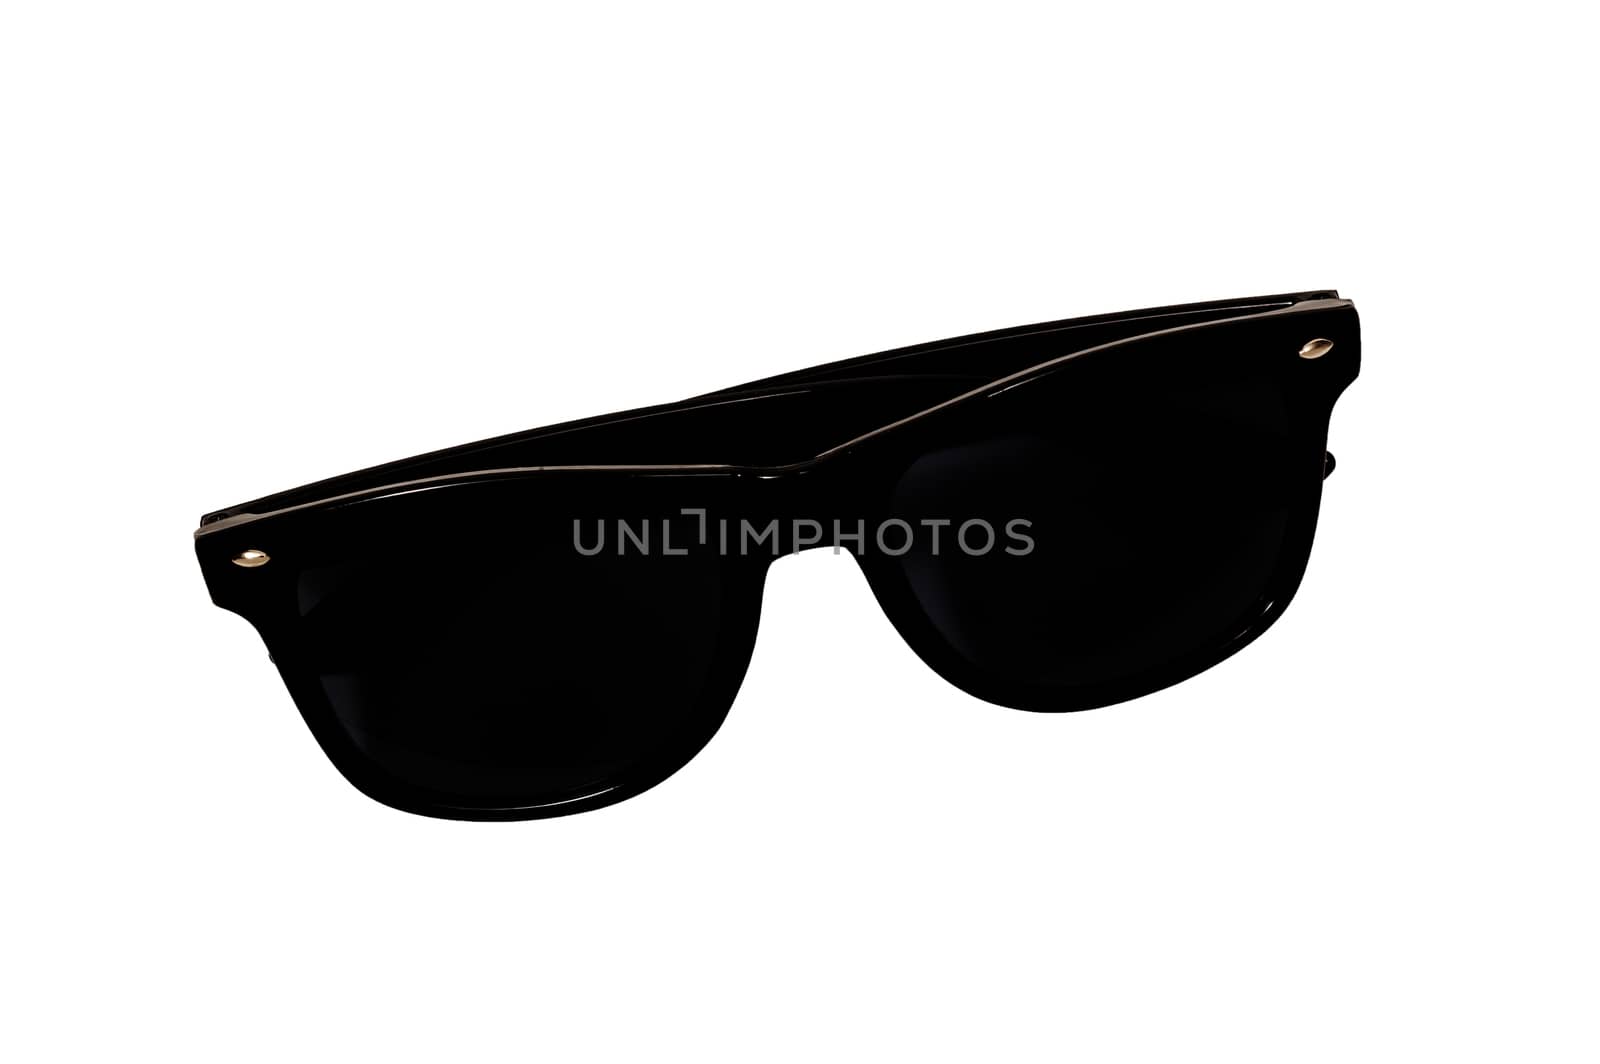 Dark Sunglasses Isolated On White by stockbuster1